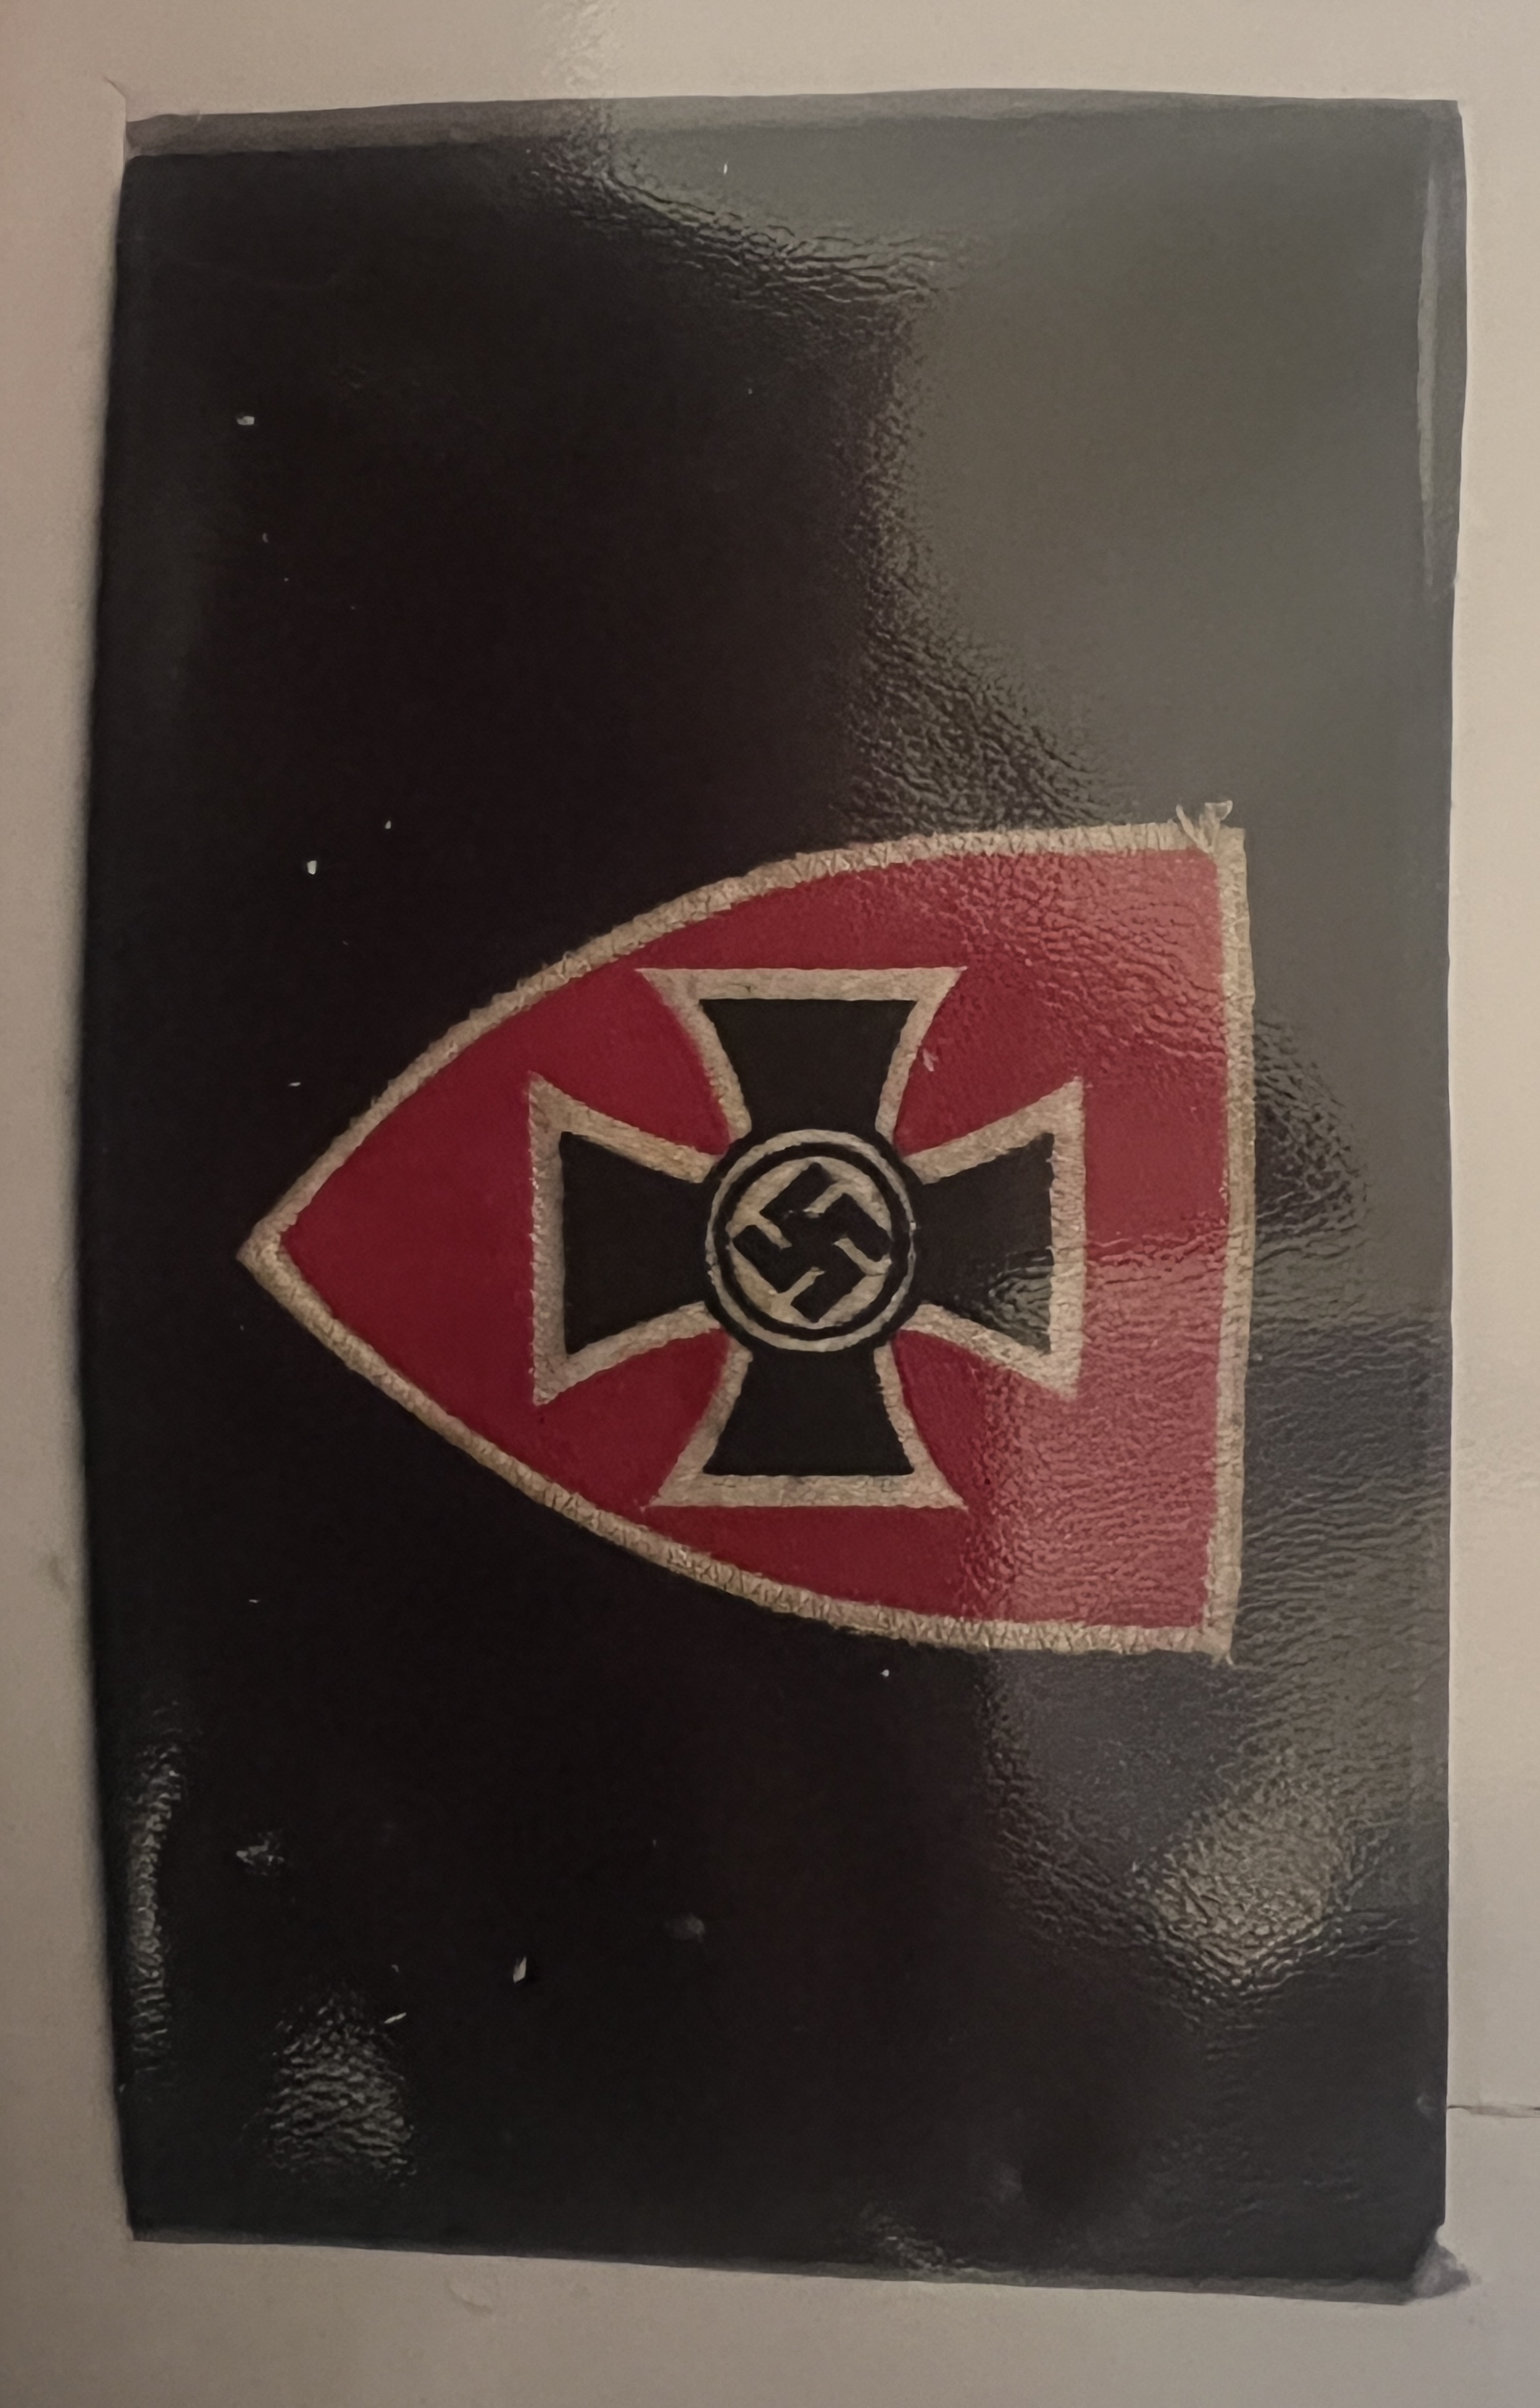 Central shield with Iron Cross and swastika on a dark-blue band